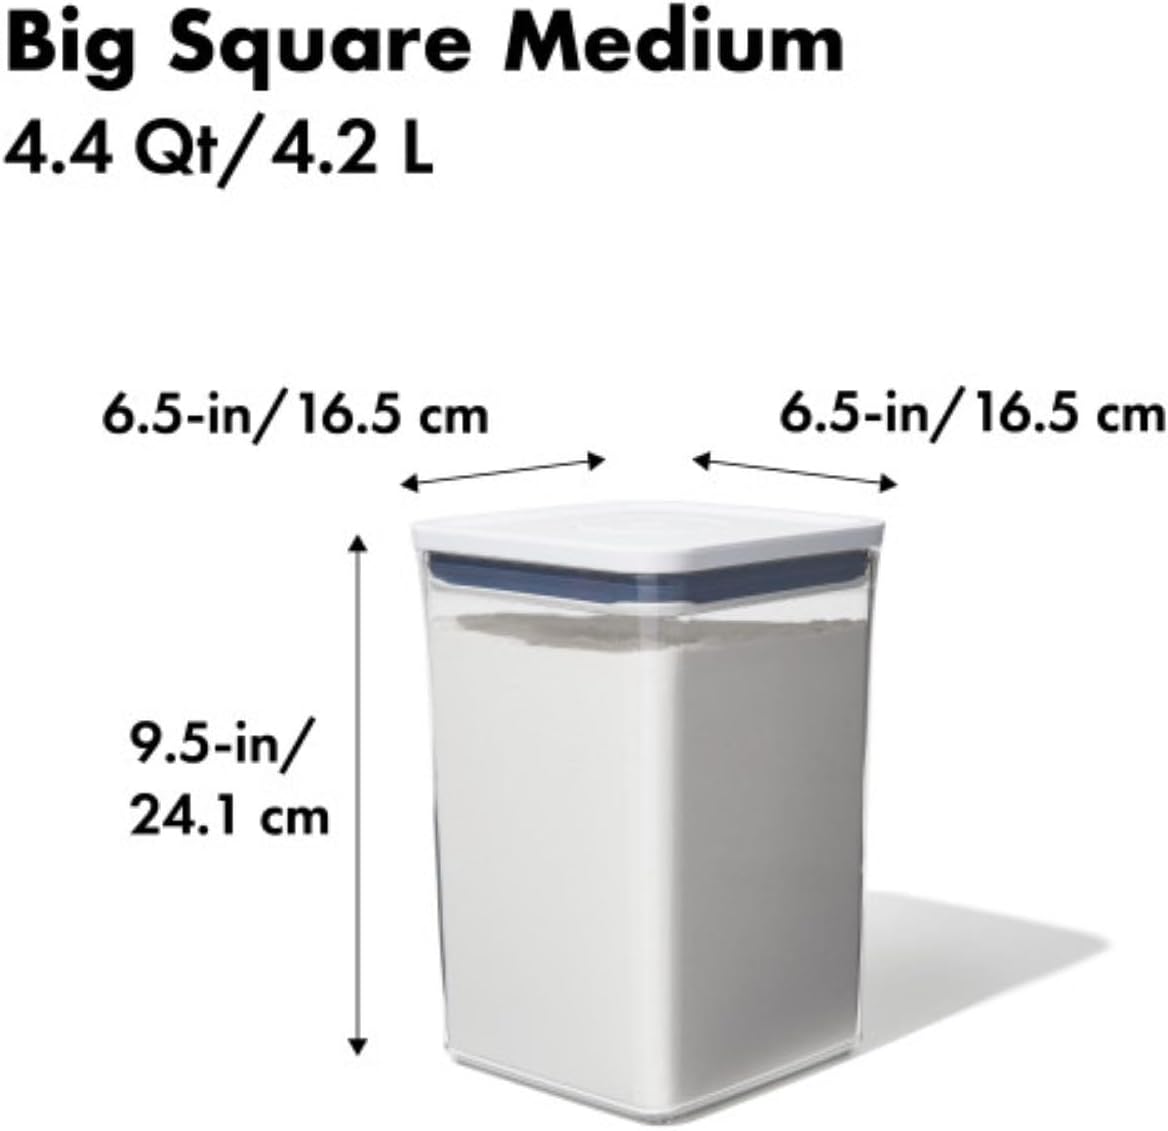 OXO Good Grips POP Container - Airtight Food Storage - Big Square Medium 4.4 Qt Ideal for 5lbs of flour or sugar.